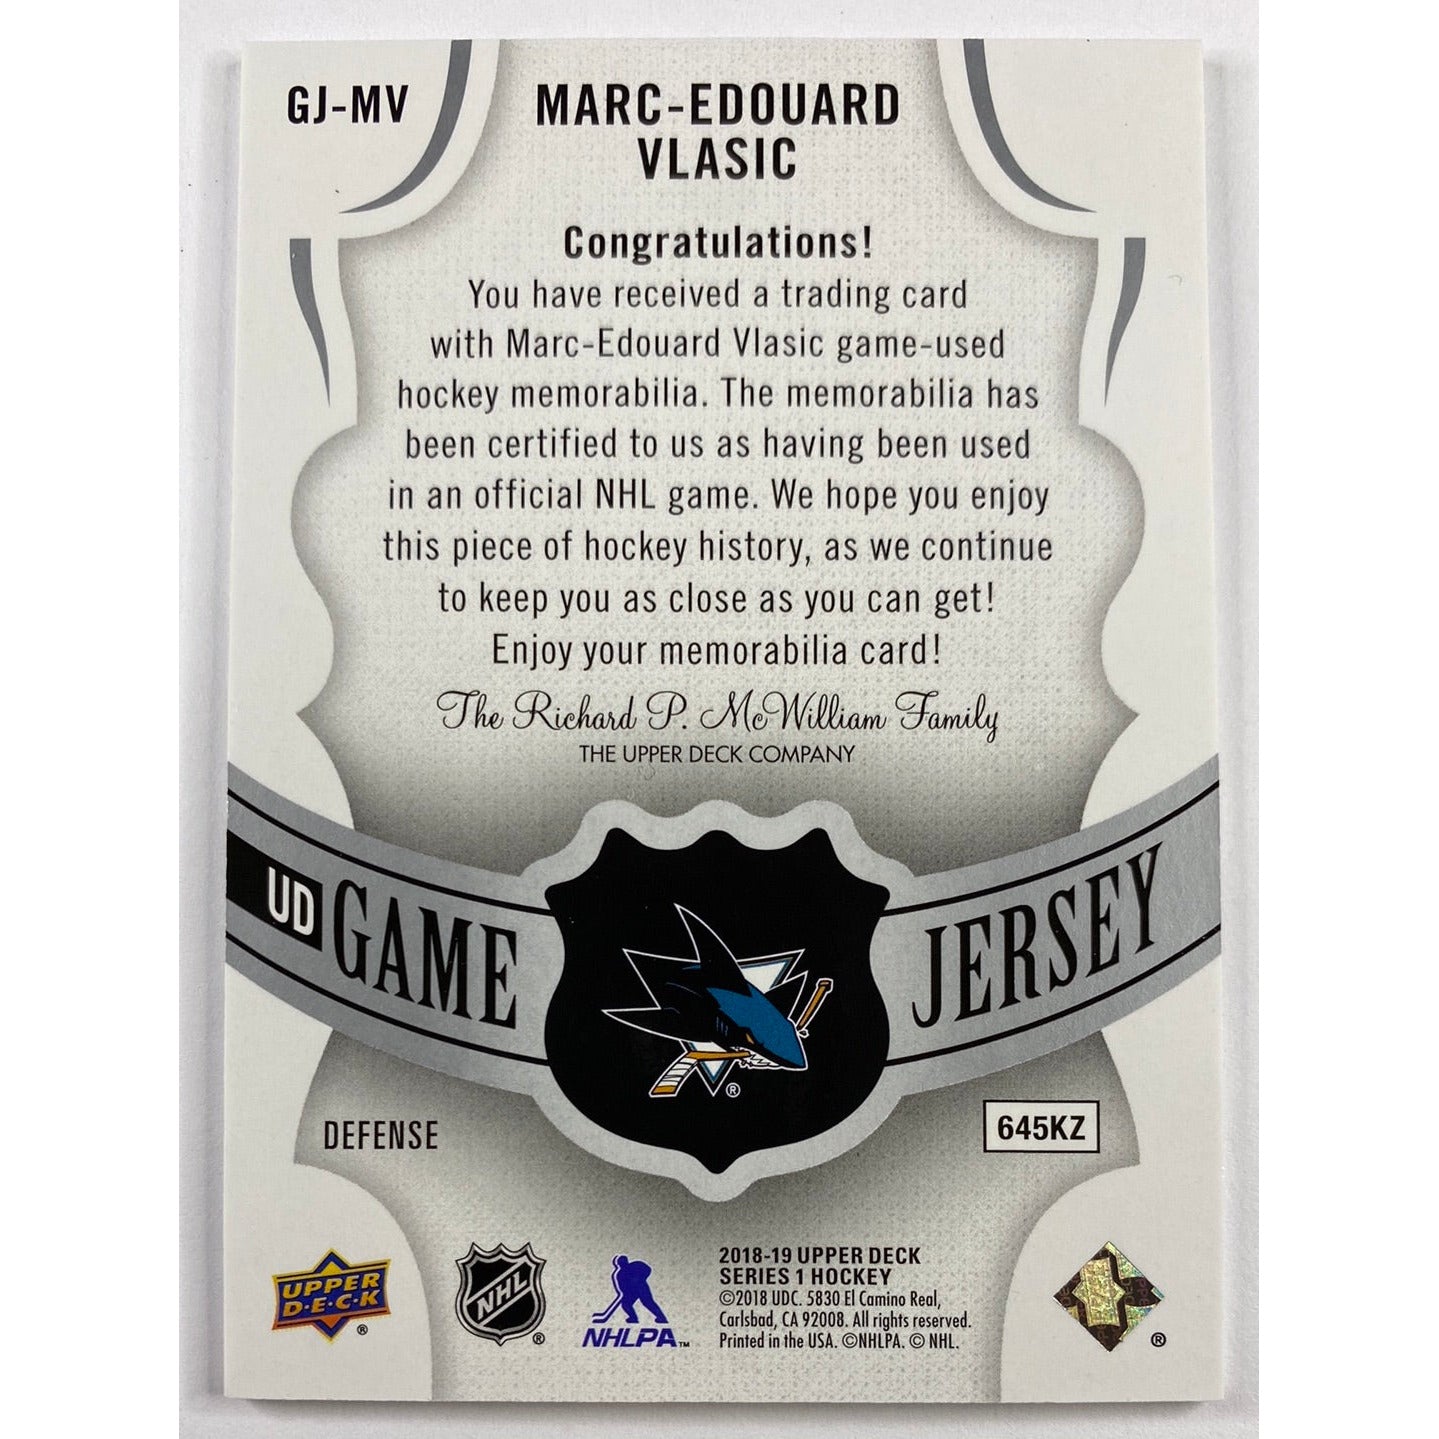 2018-19 Upper Deck Series 2 Marc-Edouard Vlasic UD Game Jersey